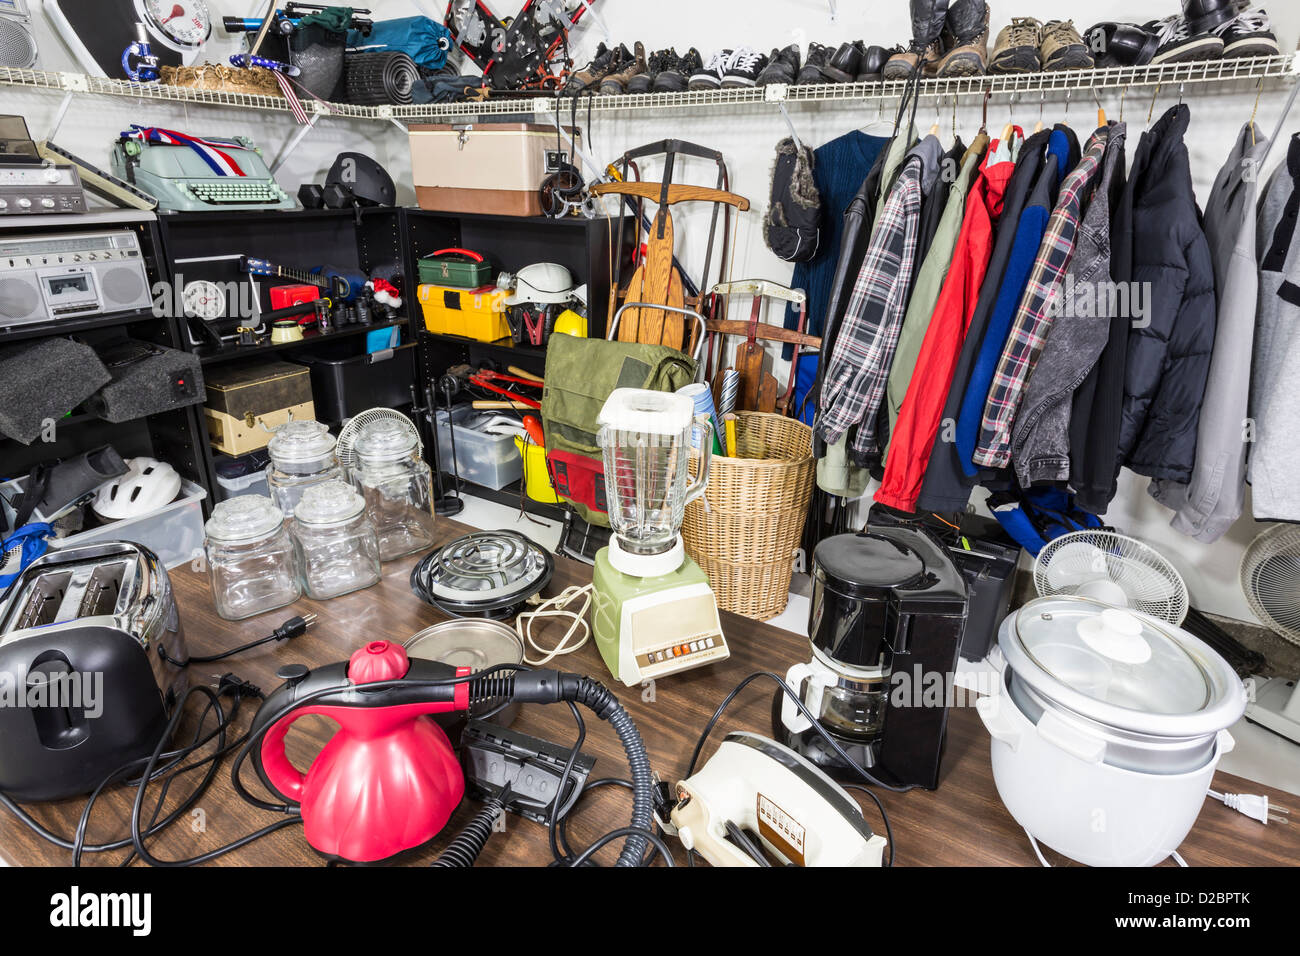 Interior garage sale, housewares, clothing, sporting goods and toys. Stock Photo